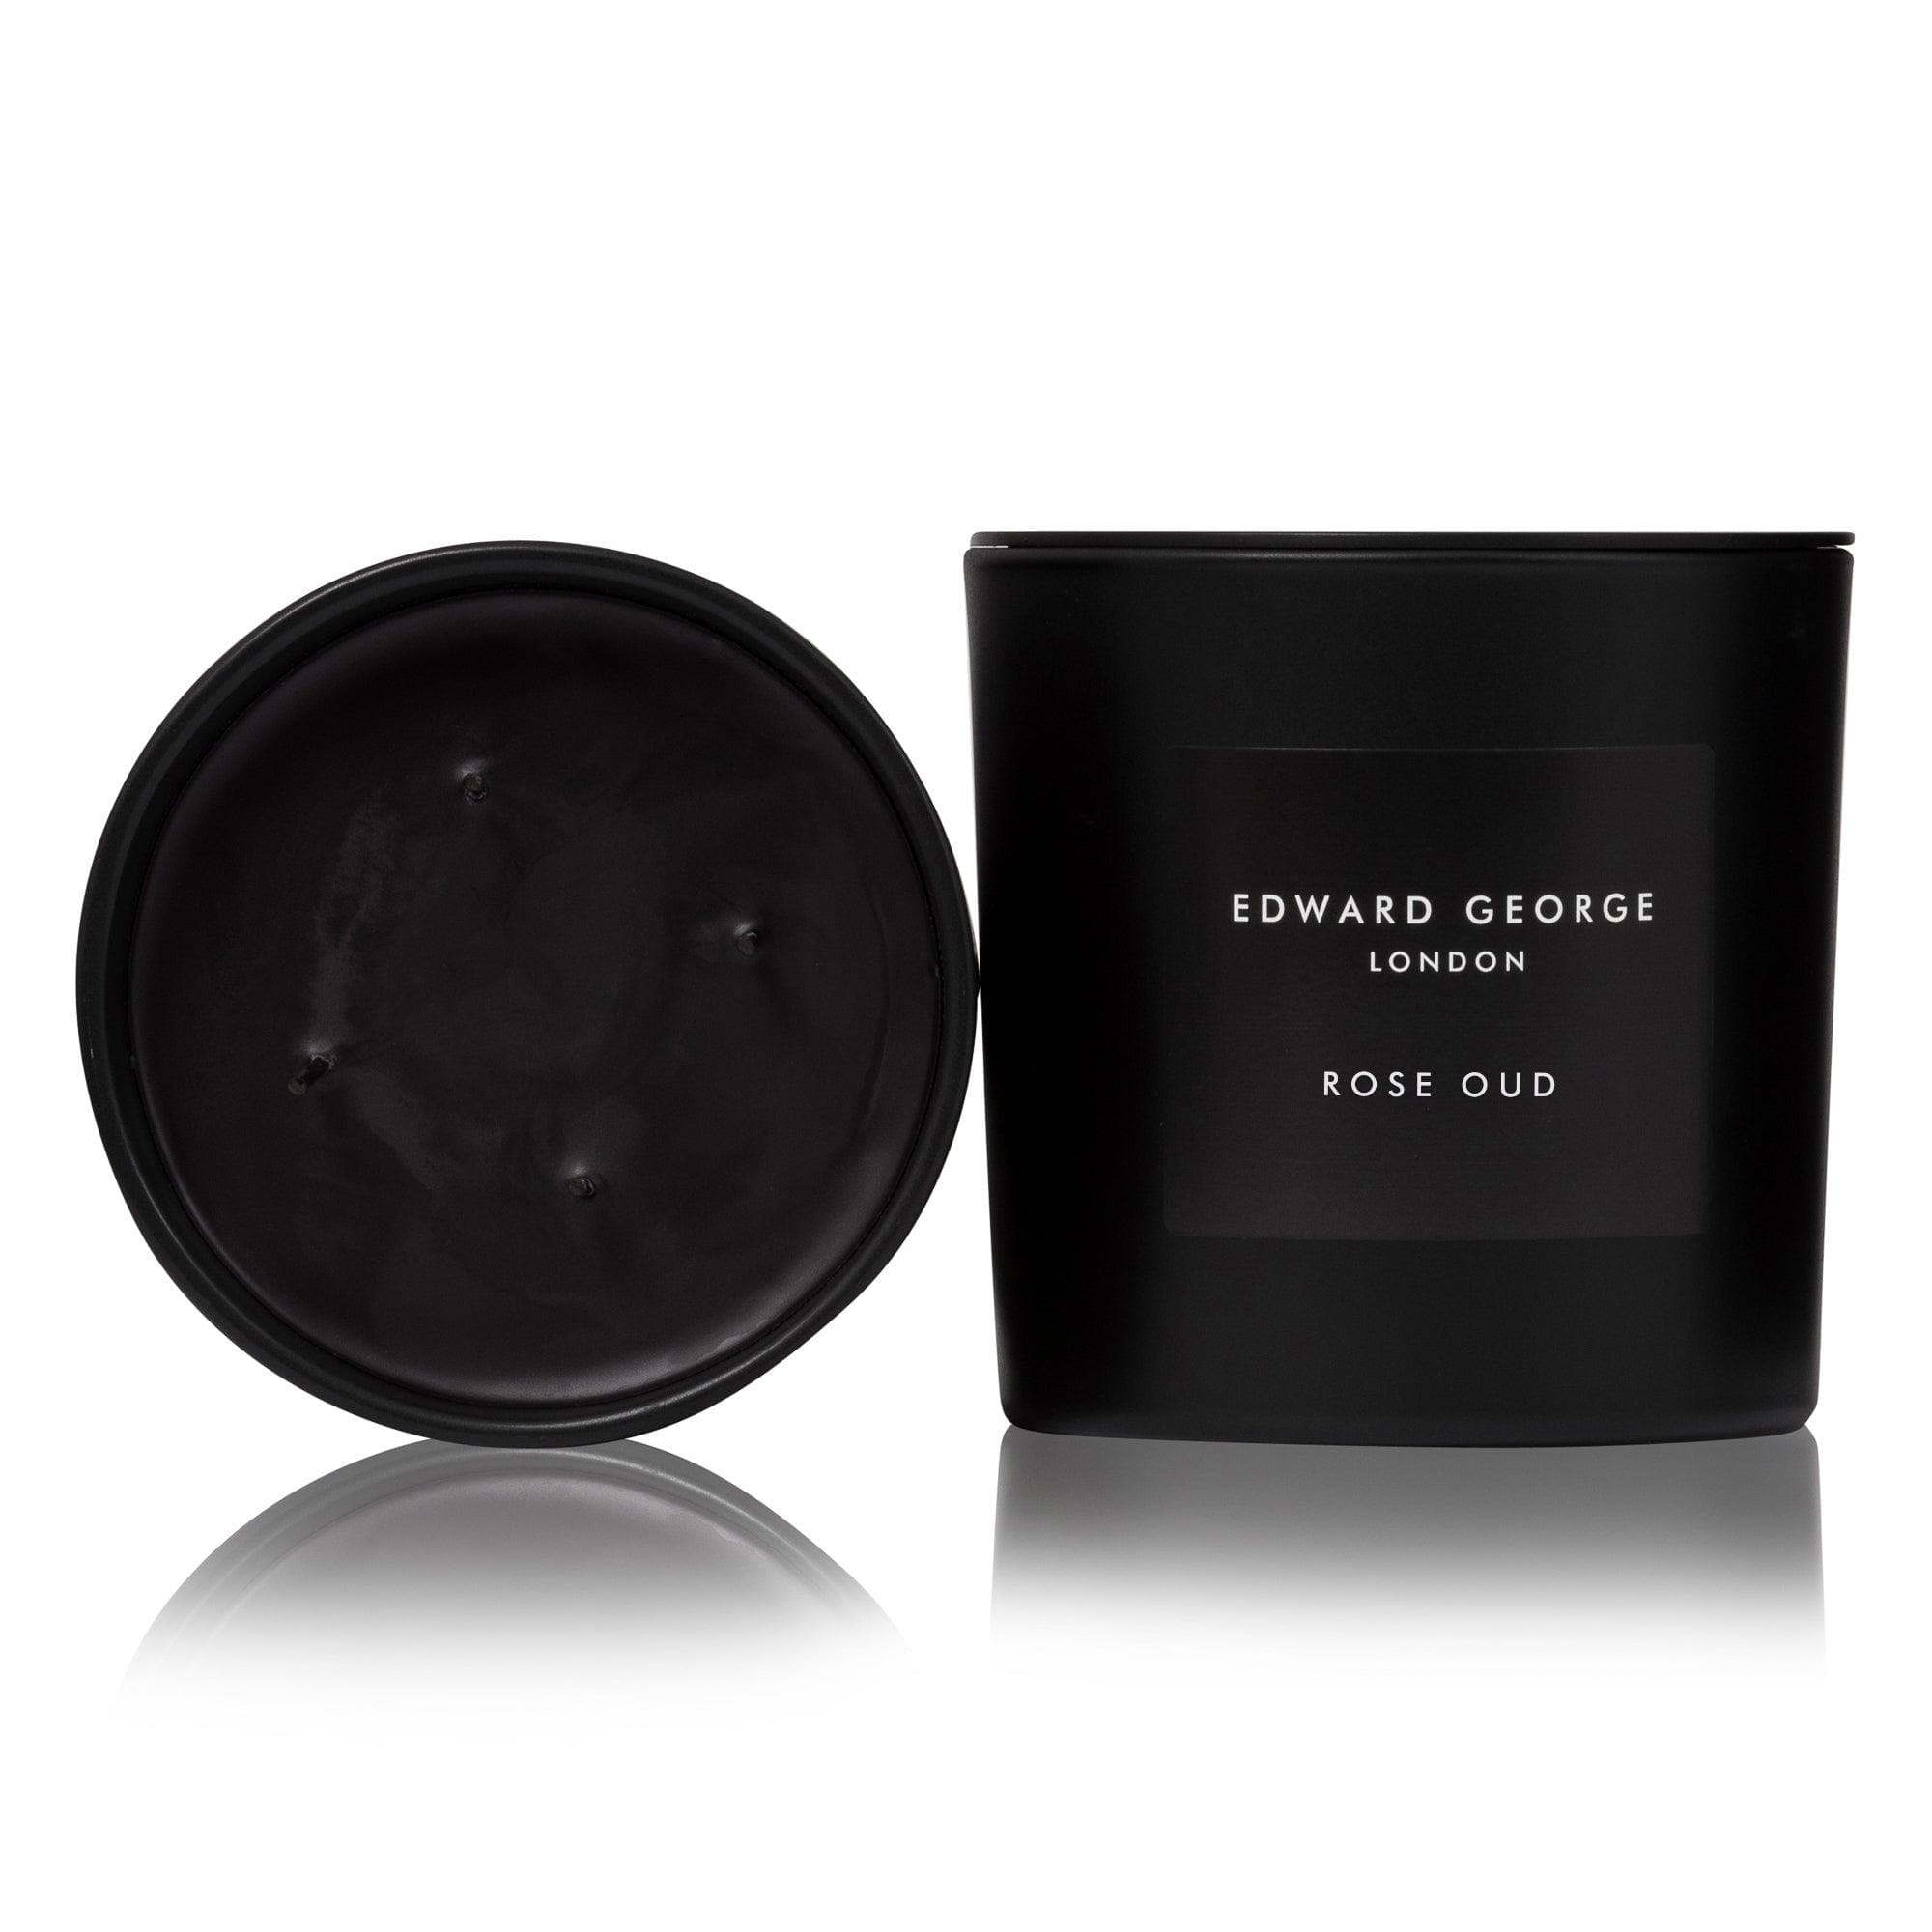 rose oud candles home fragrance decor room living room bedroom bathroom hallway kitchen study dinning edward george london luxury gift ritual scent set lid zinc alloy black wax mineral best black wax scented candle women men large